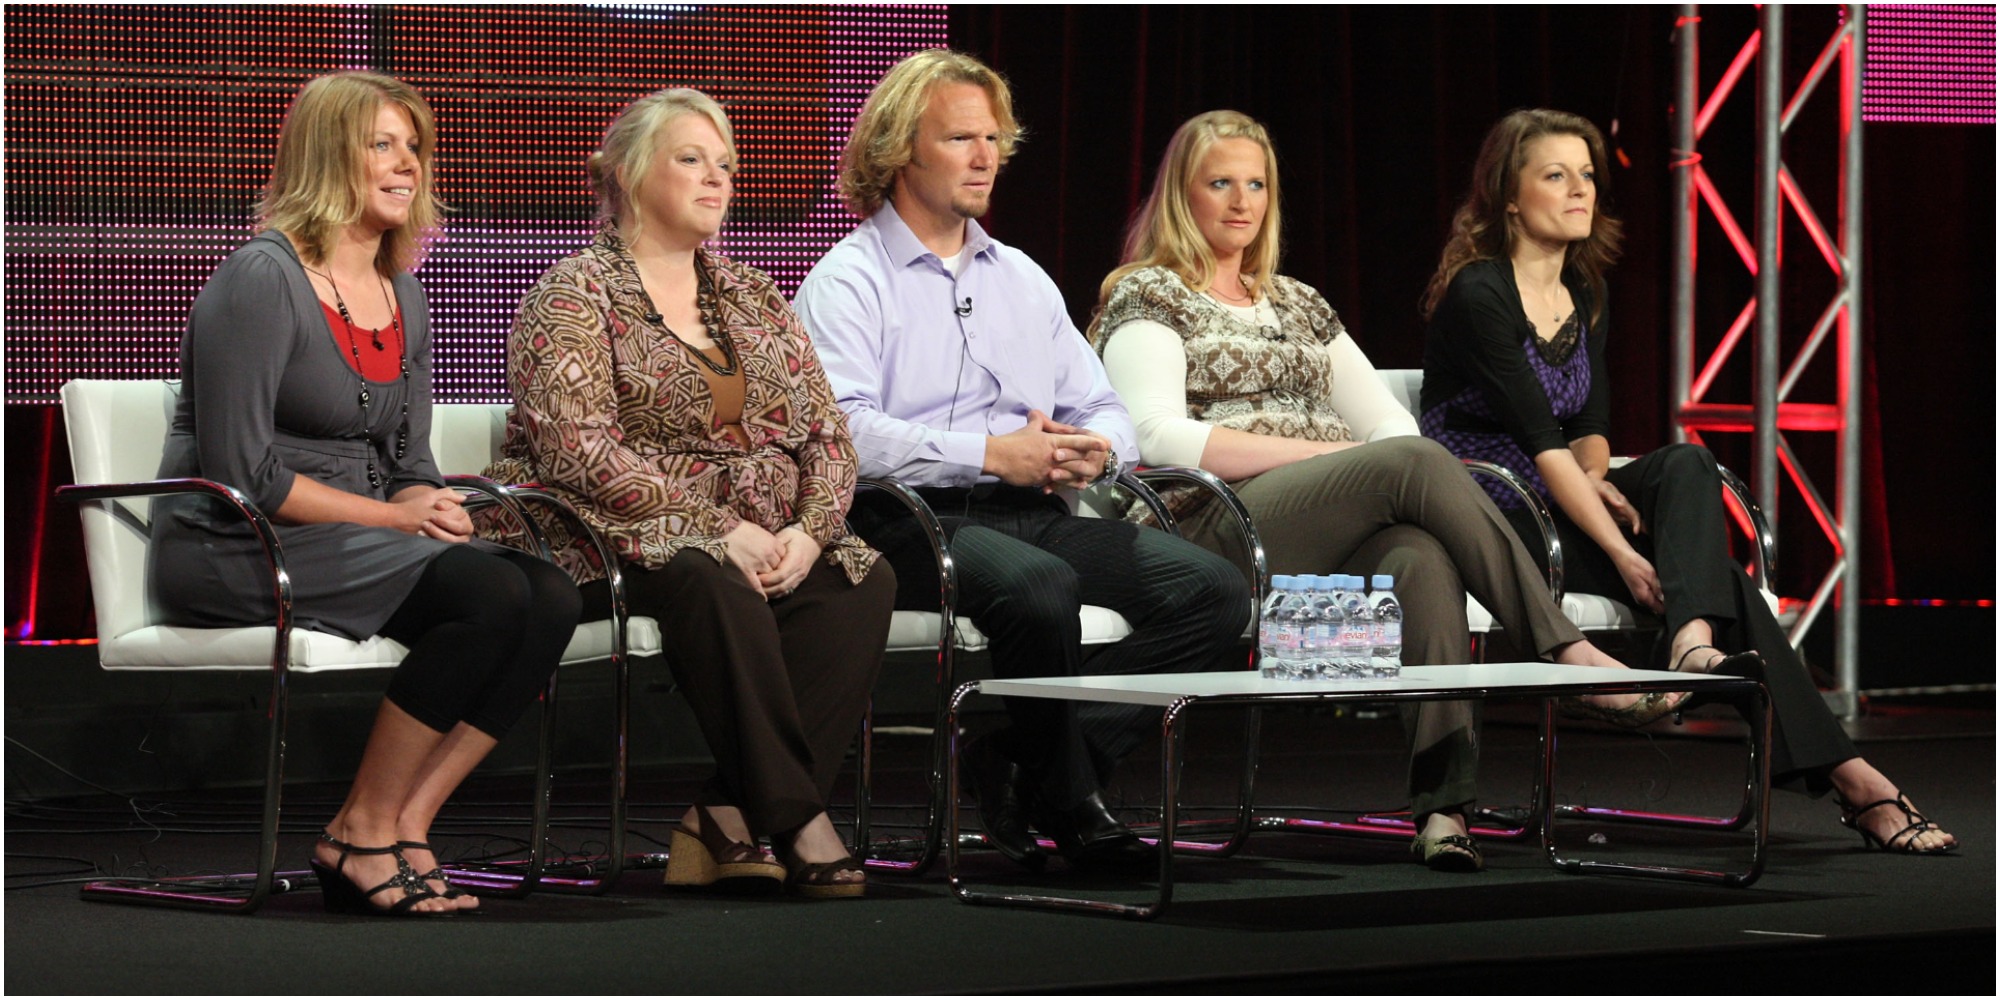 The cast of "Sister Wives" at a TLC event.